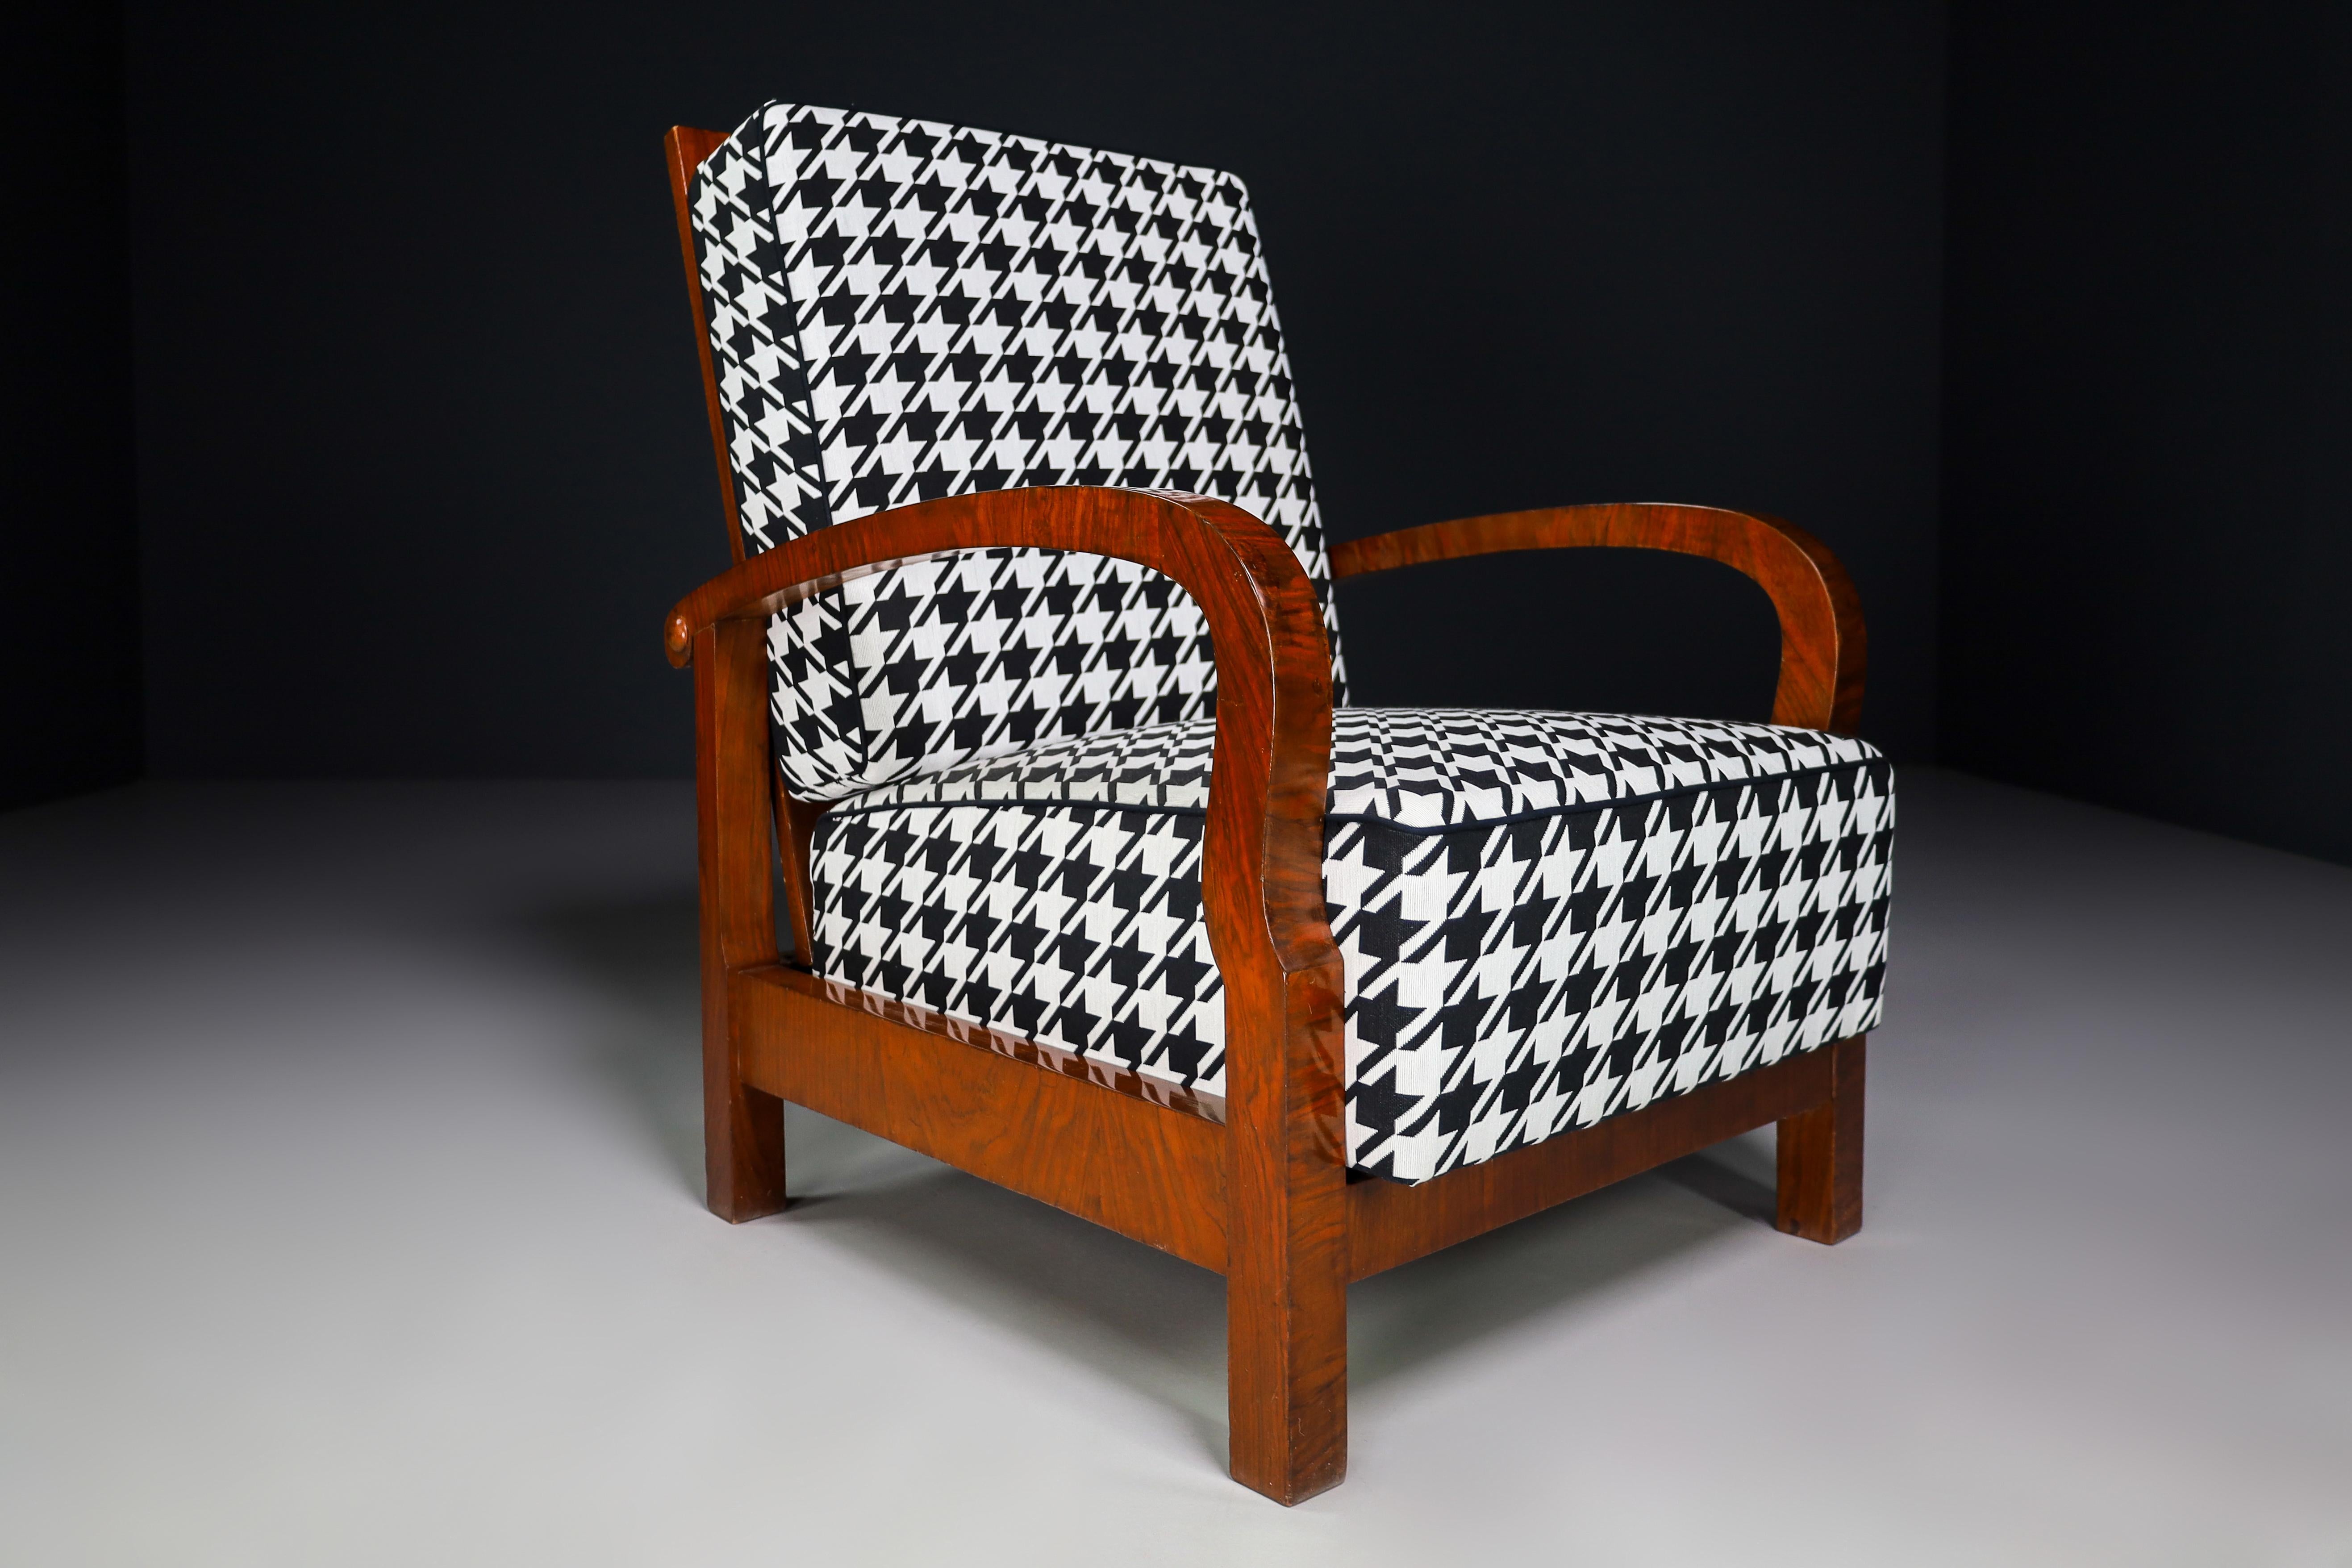 Czech Art Deco Armchairs in Walnut and Reupholstered Fabric, Praque 1930s For Sale